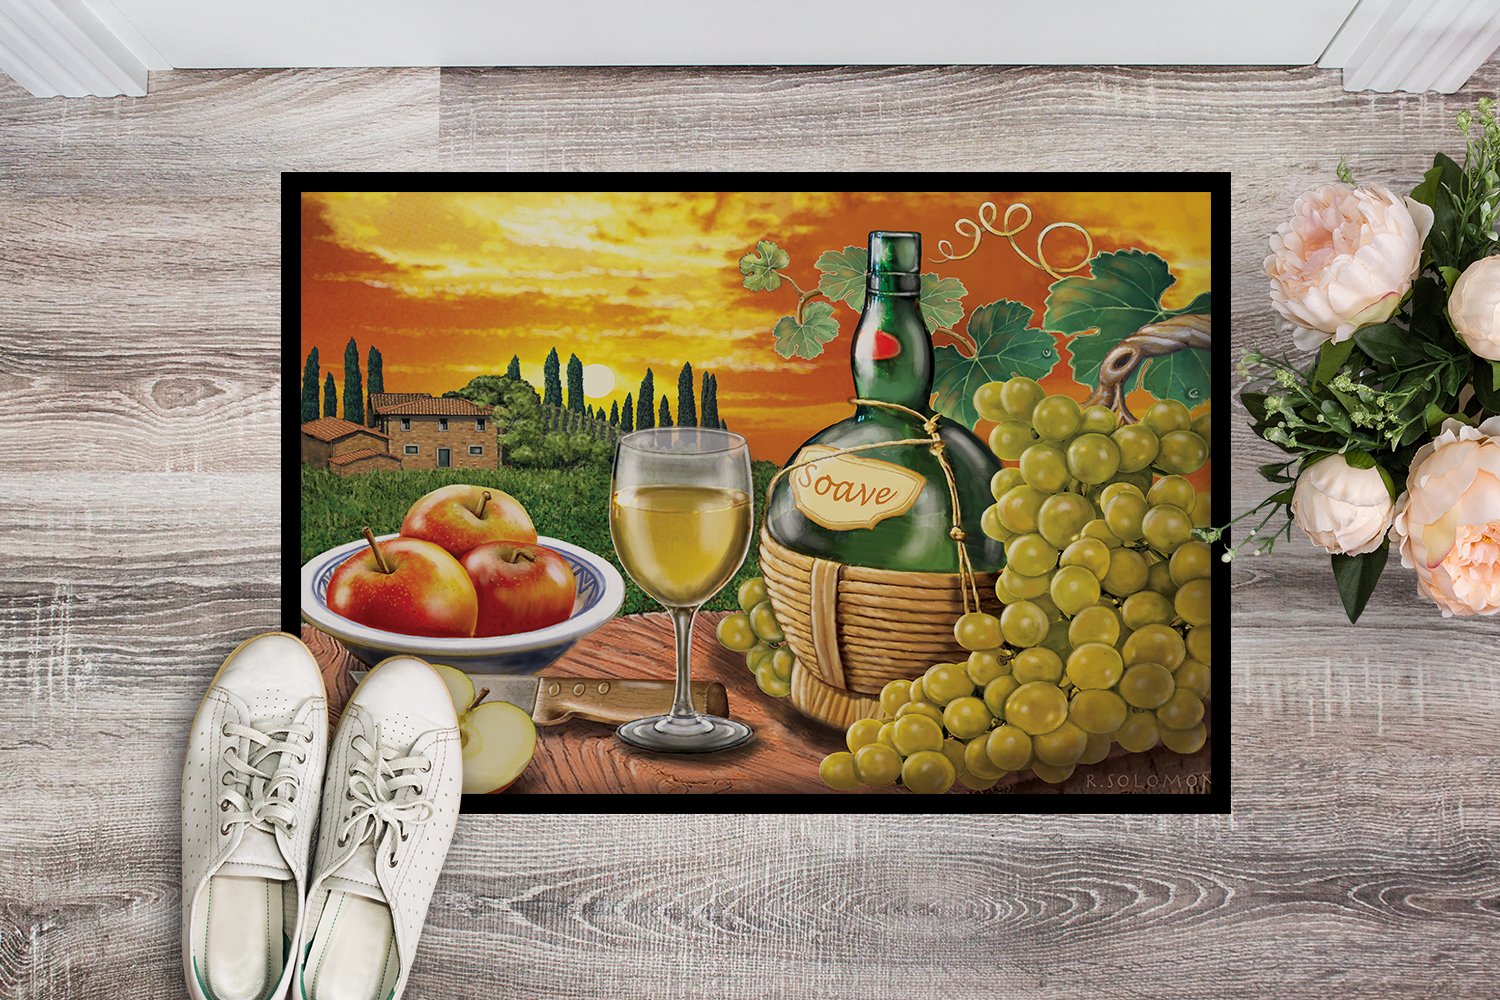 Soave, Apple, Wine and Cheese Indoor or Outdoor Mat 24x36 PRS4027JMAT by Caroline's Treasures